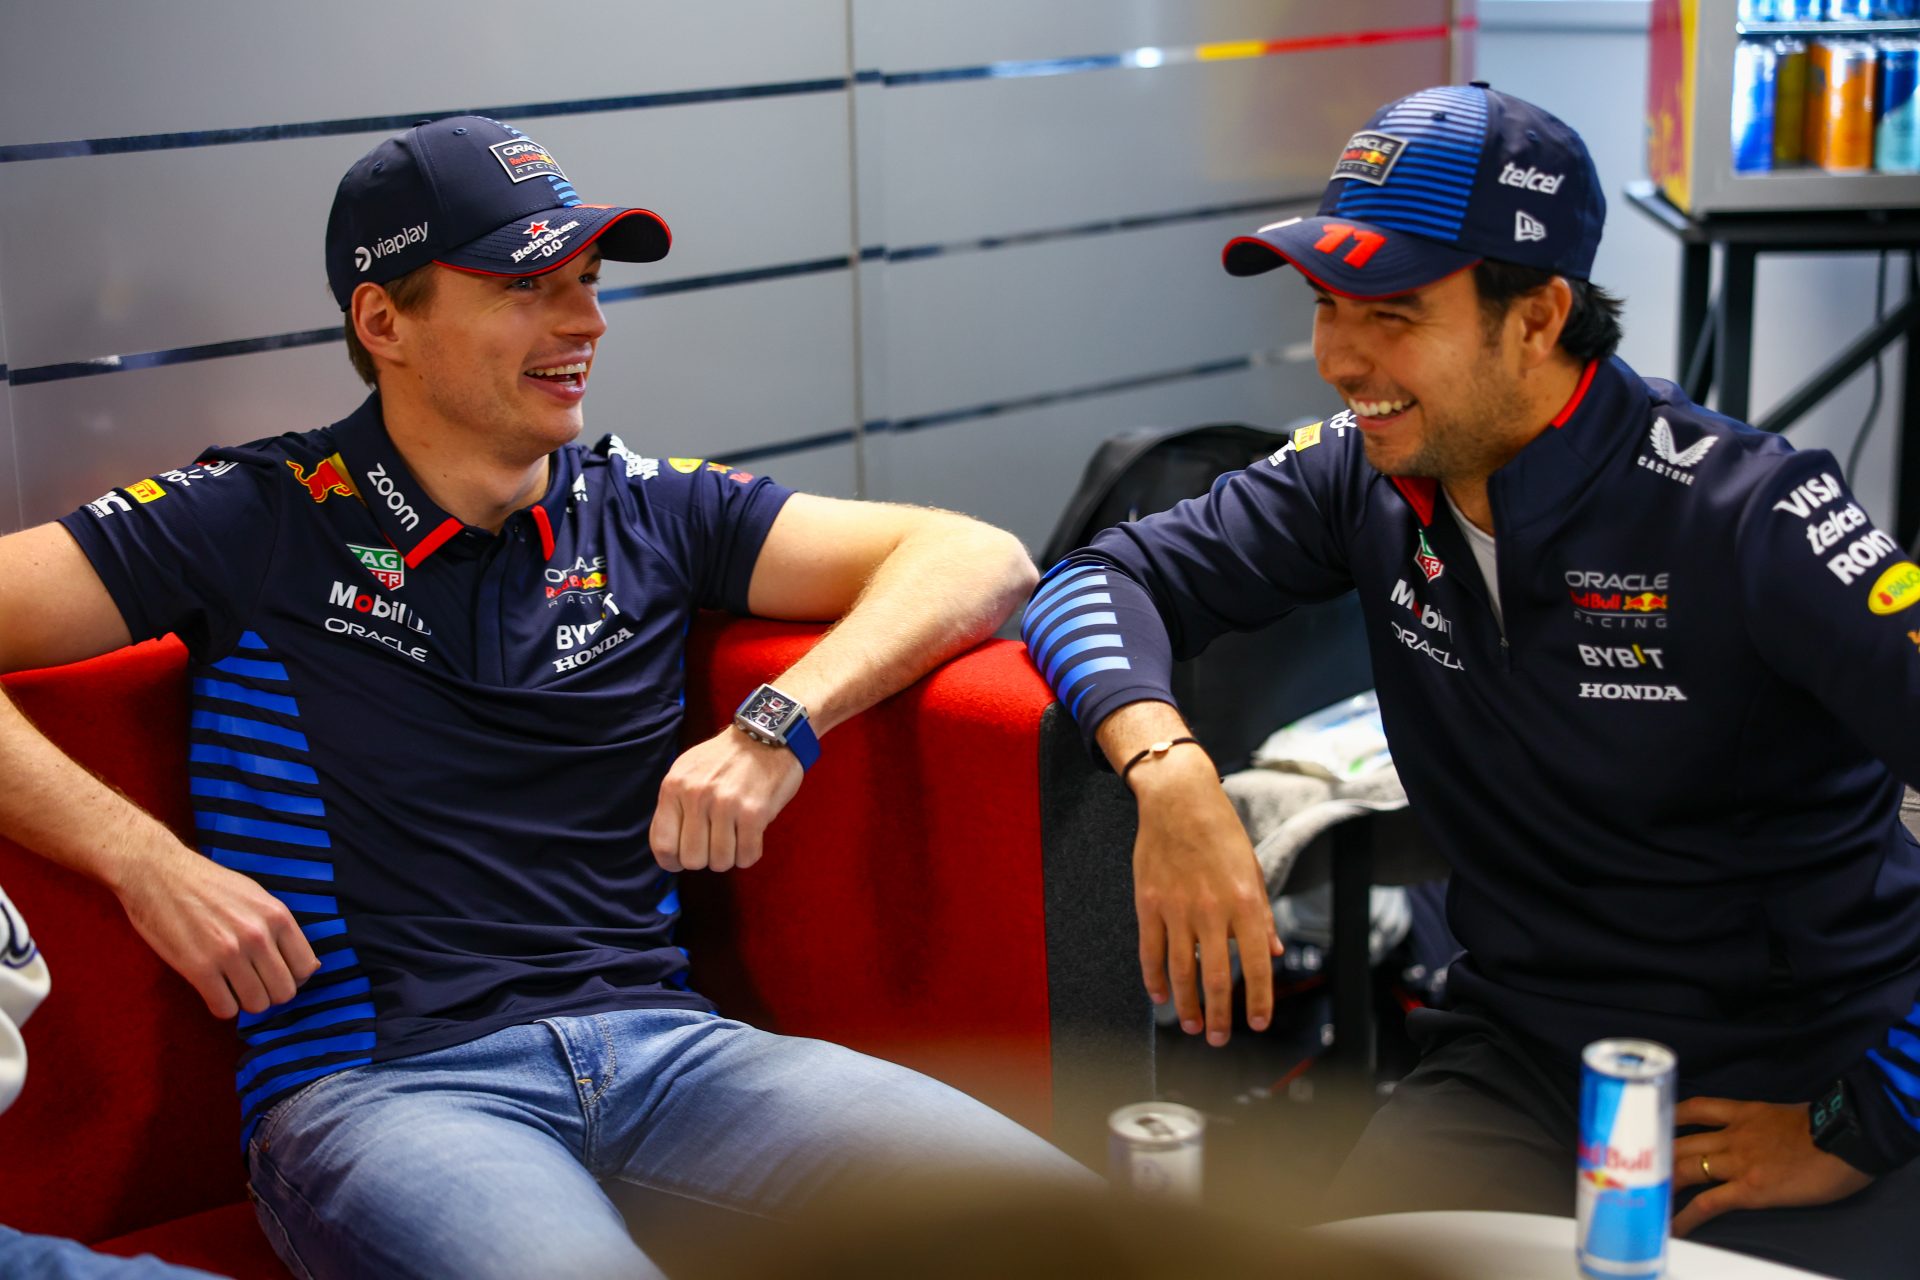 Formula 1 returns Who are the favourites to challenge Red Bull's Max